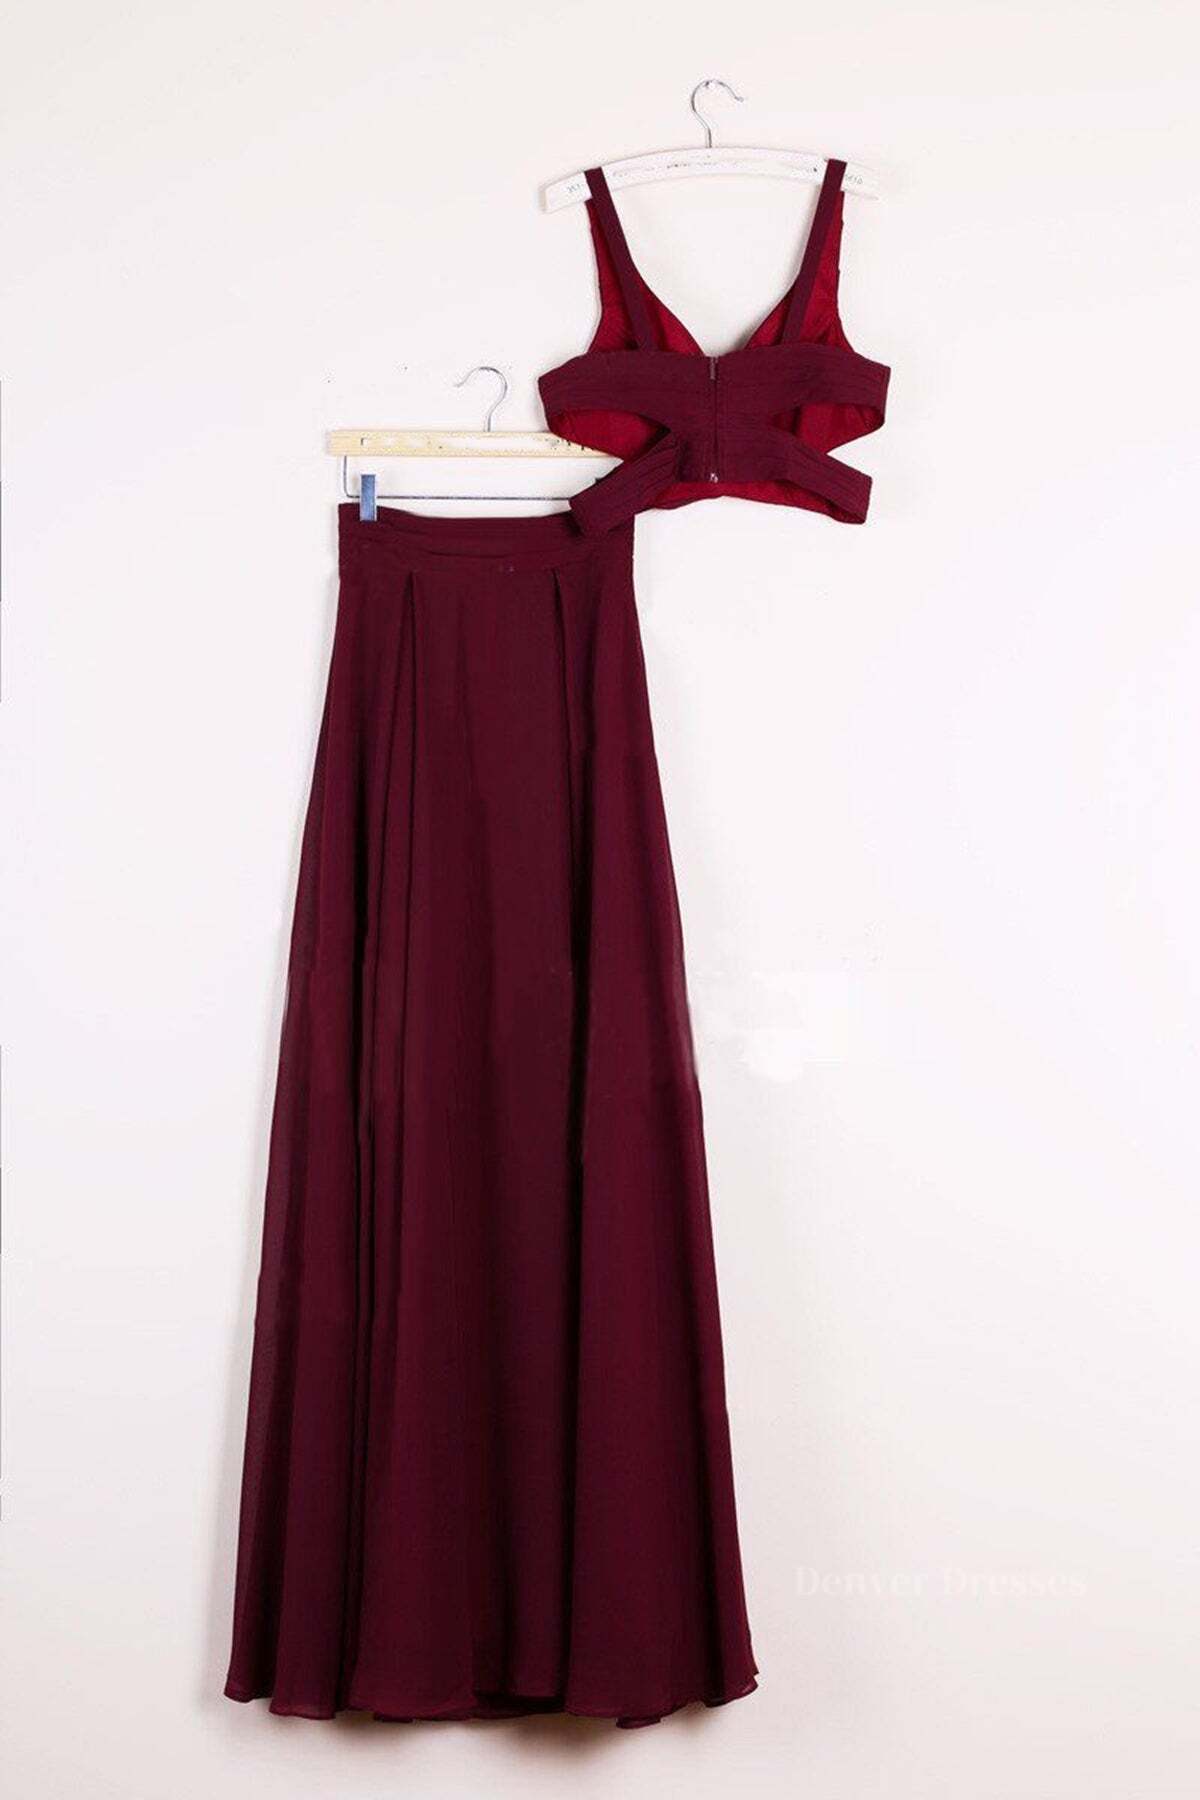 Evening Dresses V Neck, Two Pieces Burgundy Long Prom Dresses, Dark Wine Red 2 Pieces Long Formal Bridesmaid Dresses